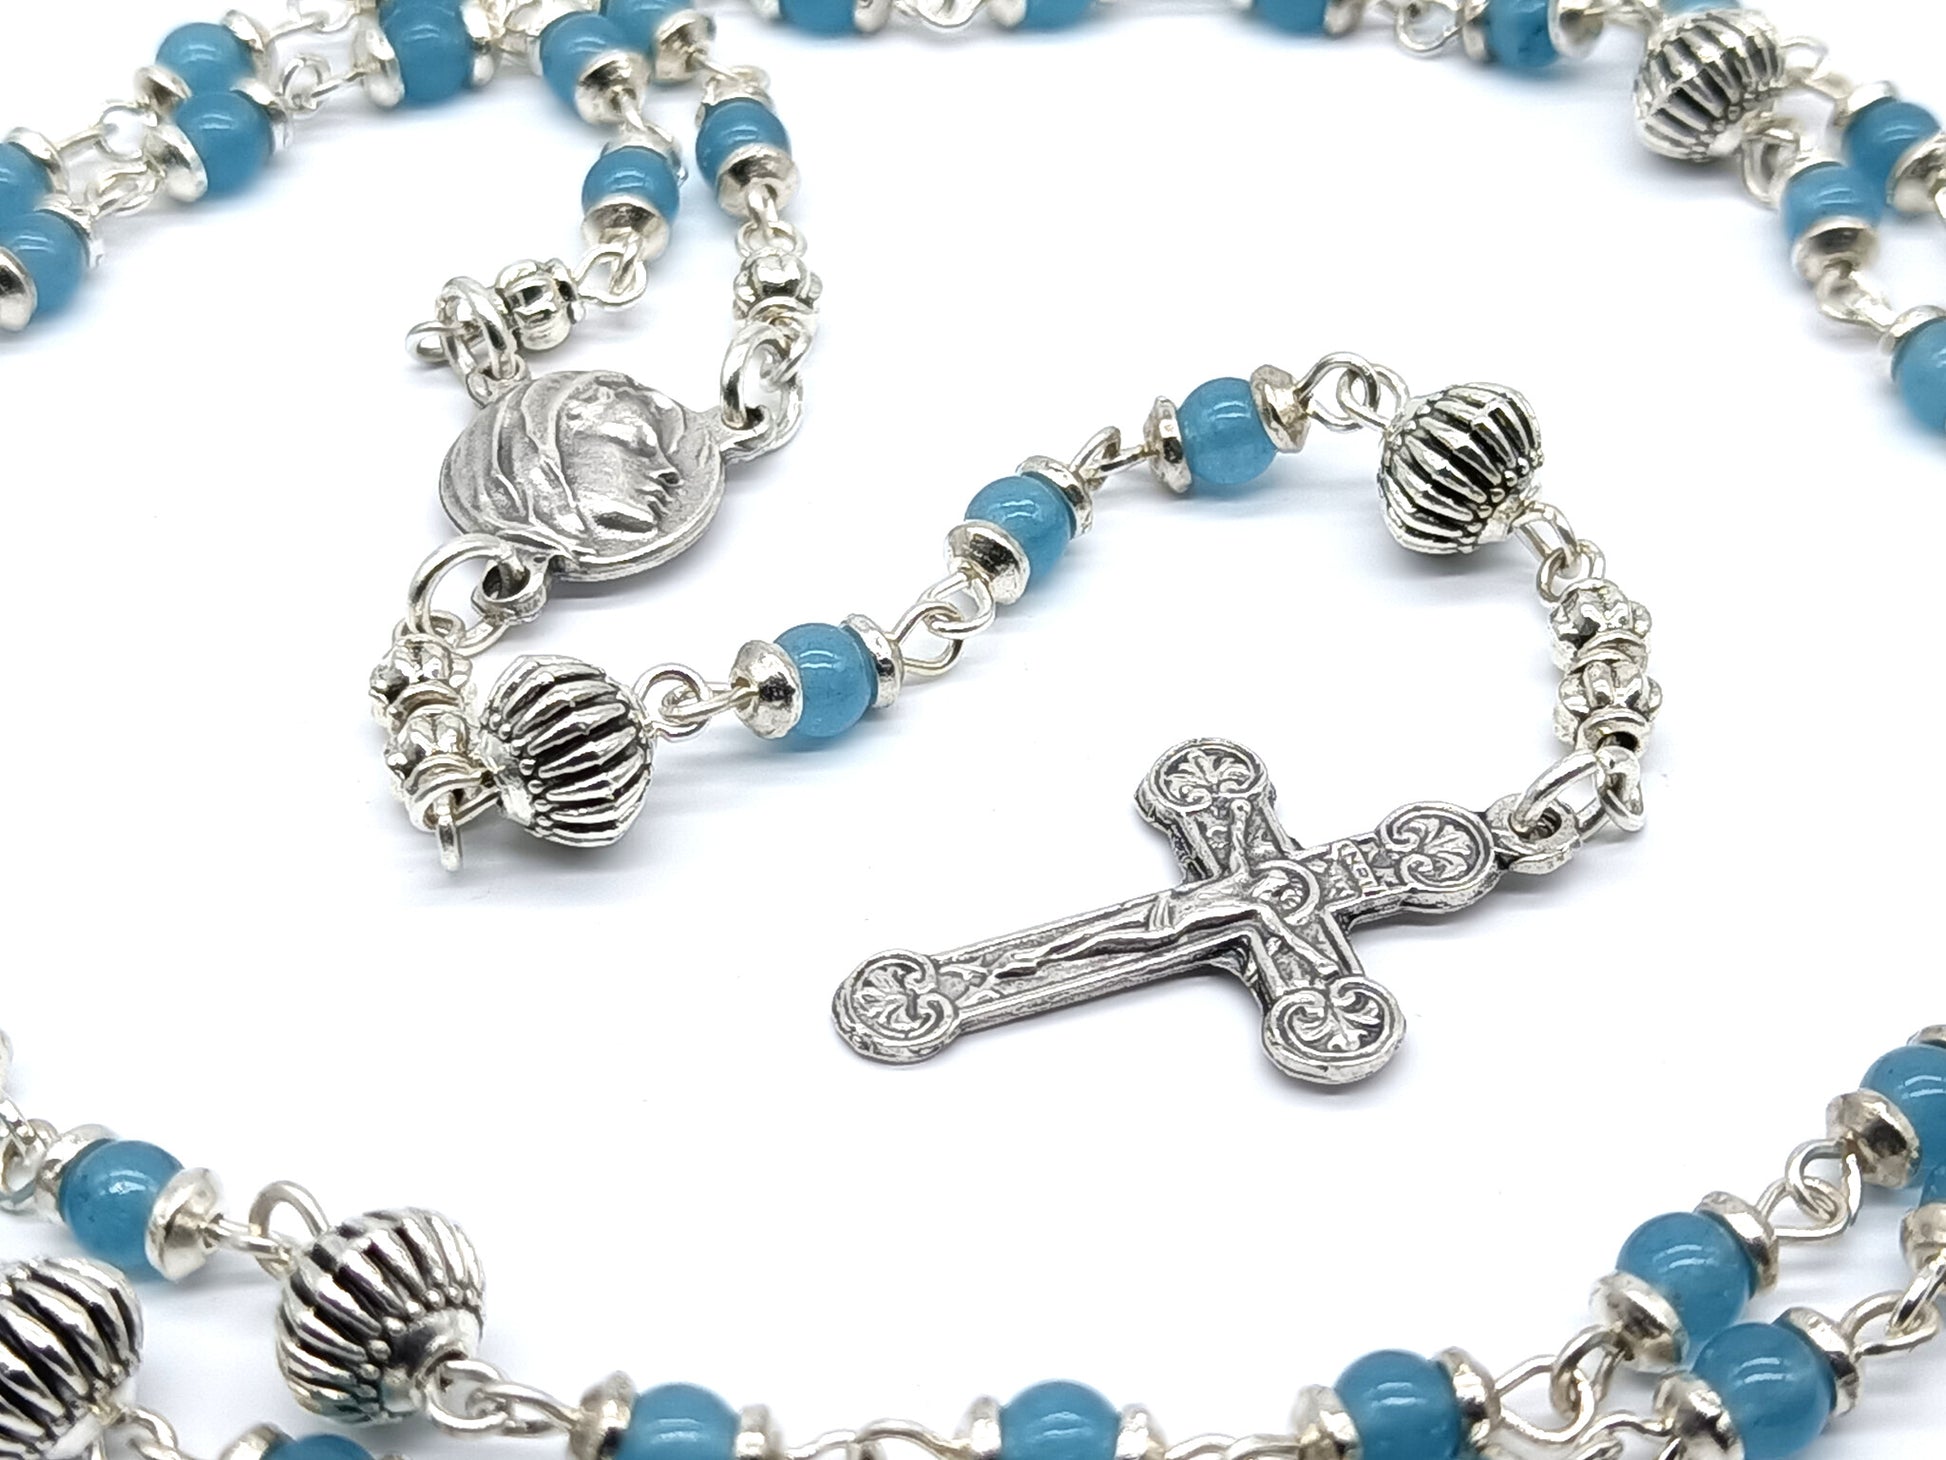 Virgin Mary unique rosary beads with blue gemstone beads, silver pater beads, crucifix and centre medal.